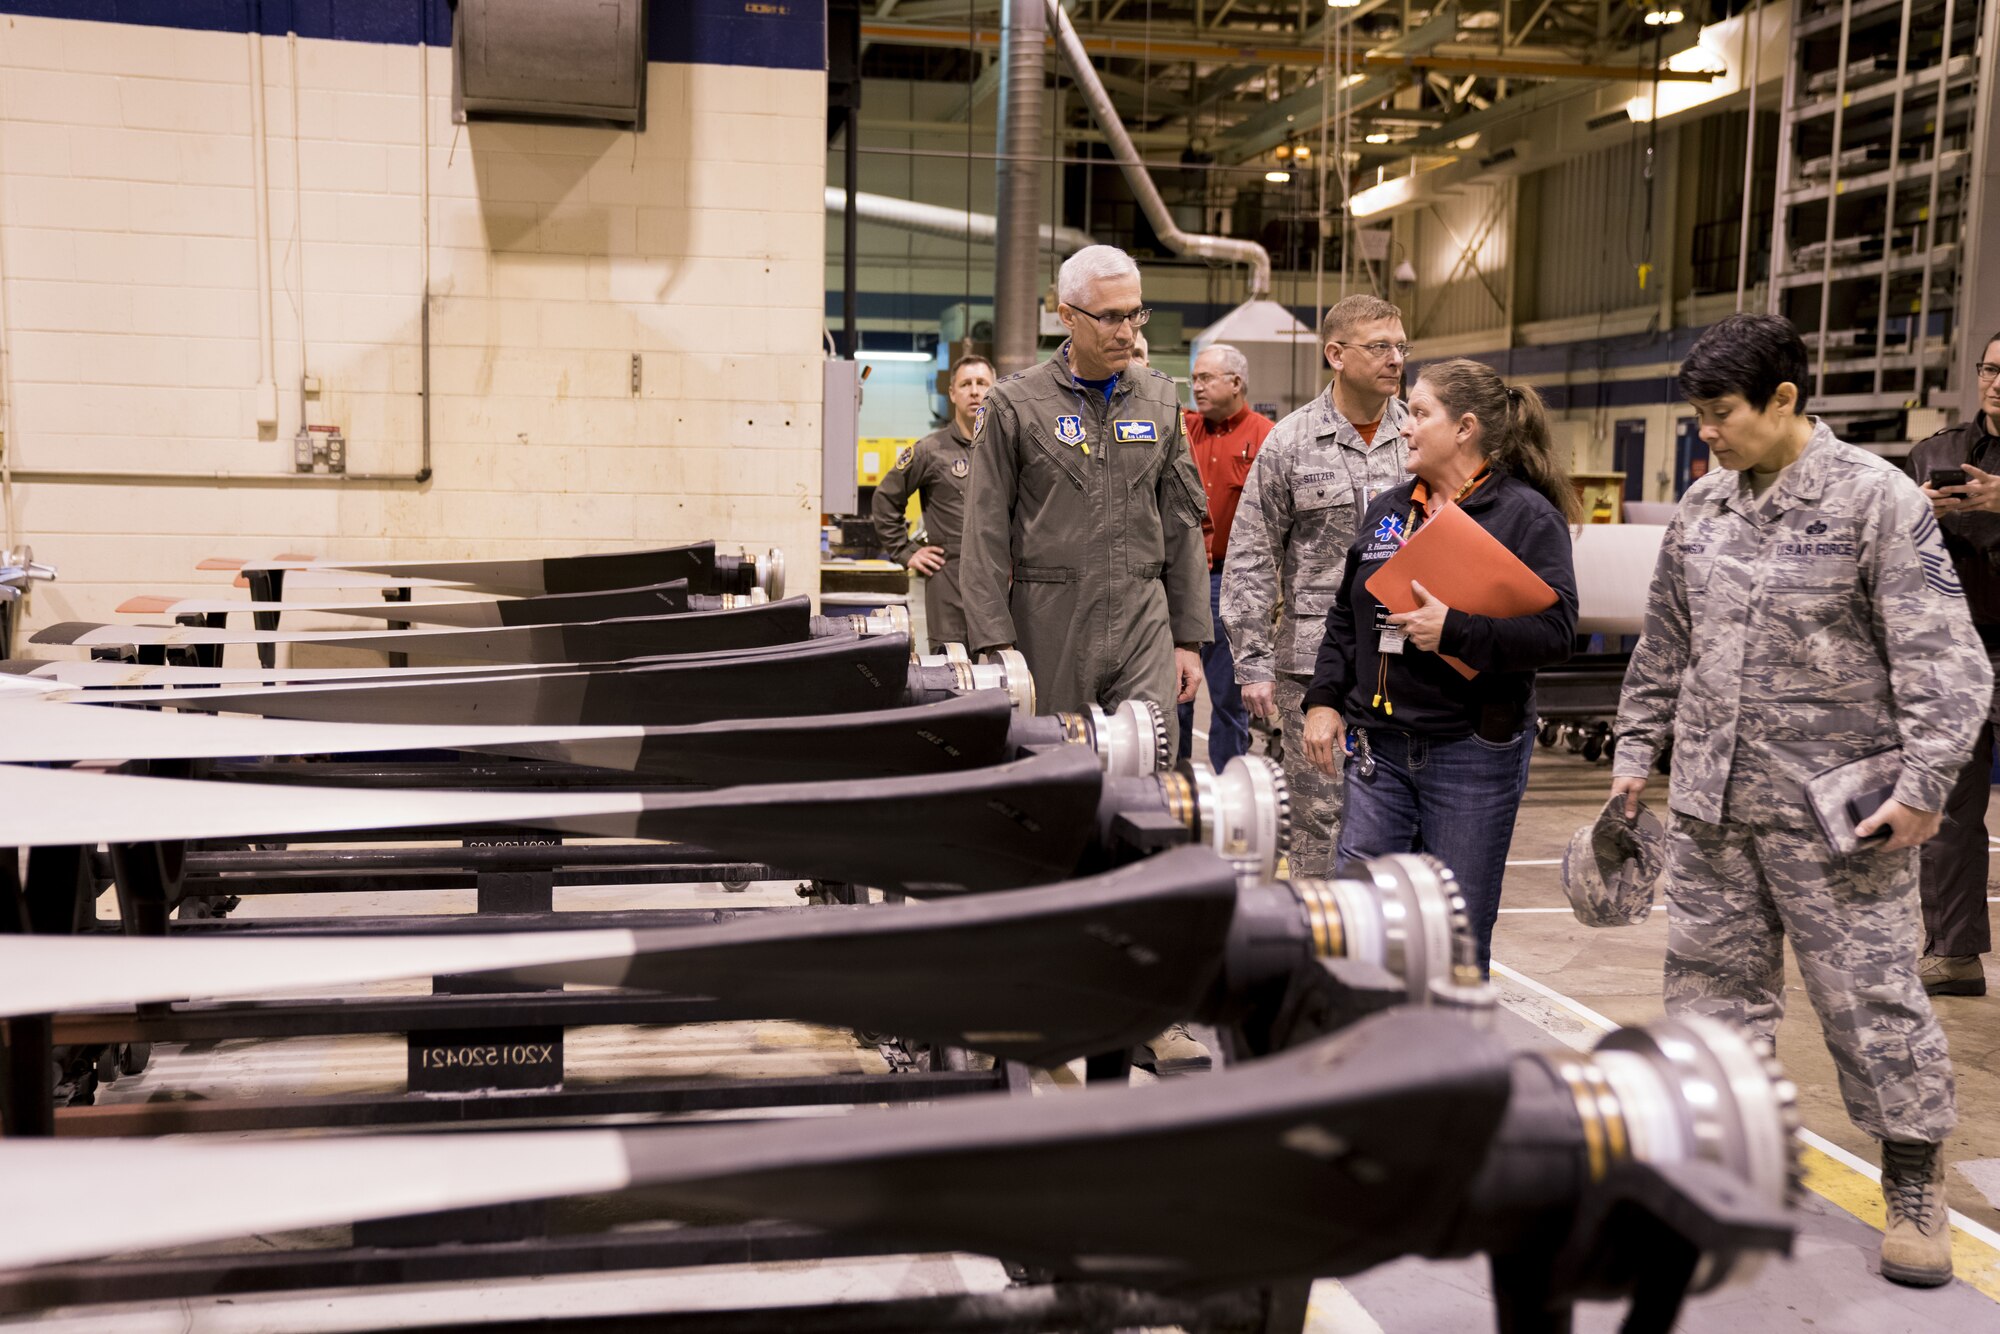 Robin Hamsley, center, leads Maj. Gen. Craig La Fave, 22nd Air Force commander, and Chief Master Sgt. Imelda Johnson, 22nd AF command chief, on a tour of the 402nd Commodities Maintenance Group facility Feb. 2, 2018, at Robins Air Force Base, Georgia. The 402nd CMXG provides depot maintenance support to F-15, C-5 and C-130 aircraft flown and tested by the 413th Flight Test Group and 339th Flight Test Squadron. Hamsley is a director assigned to the 572nd Aircraft Component Repair Squadron. (U.S. Air Force photo by Jamal D. Sutter)